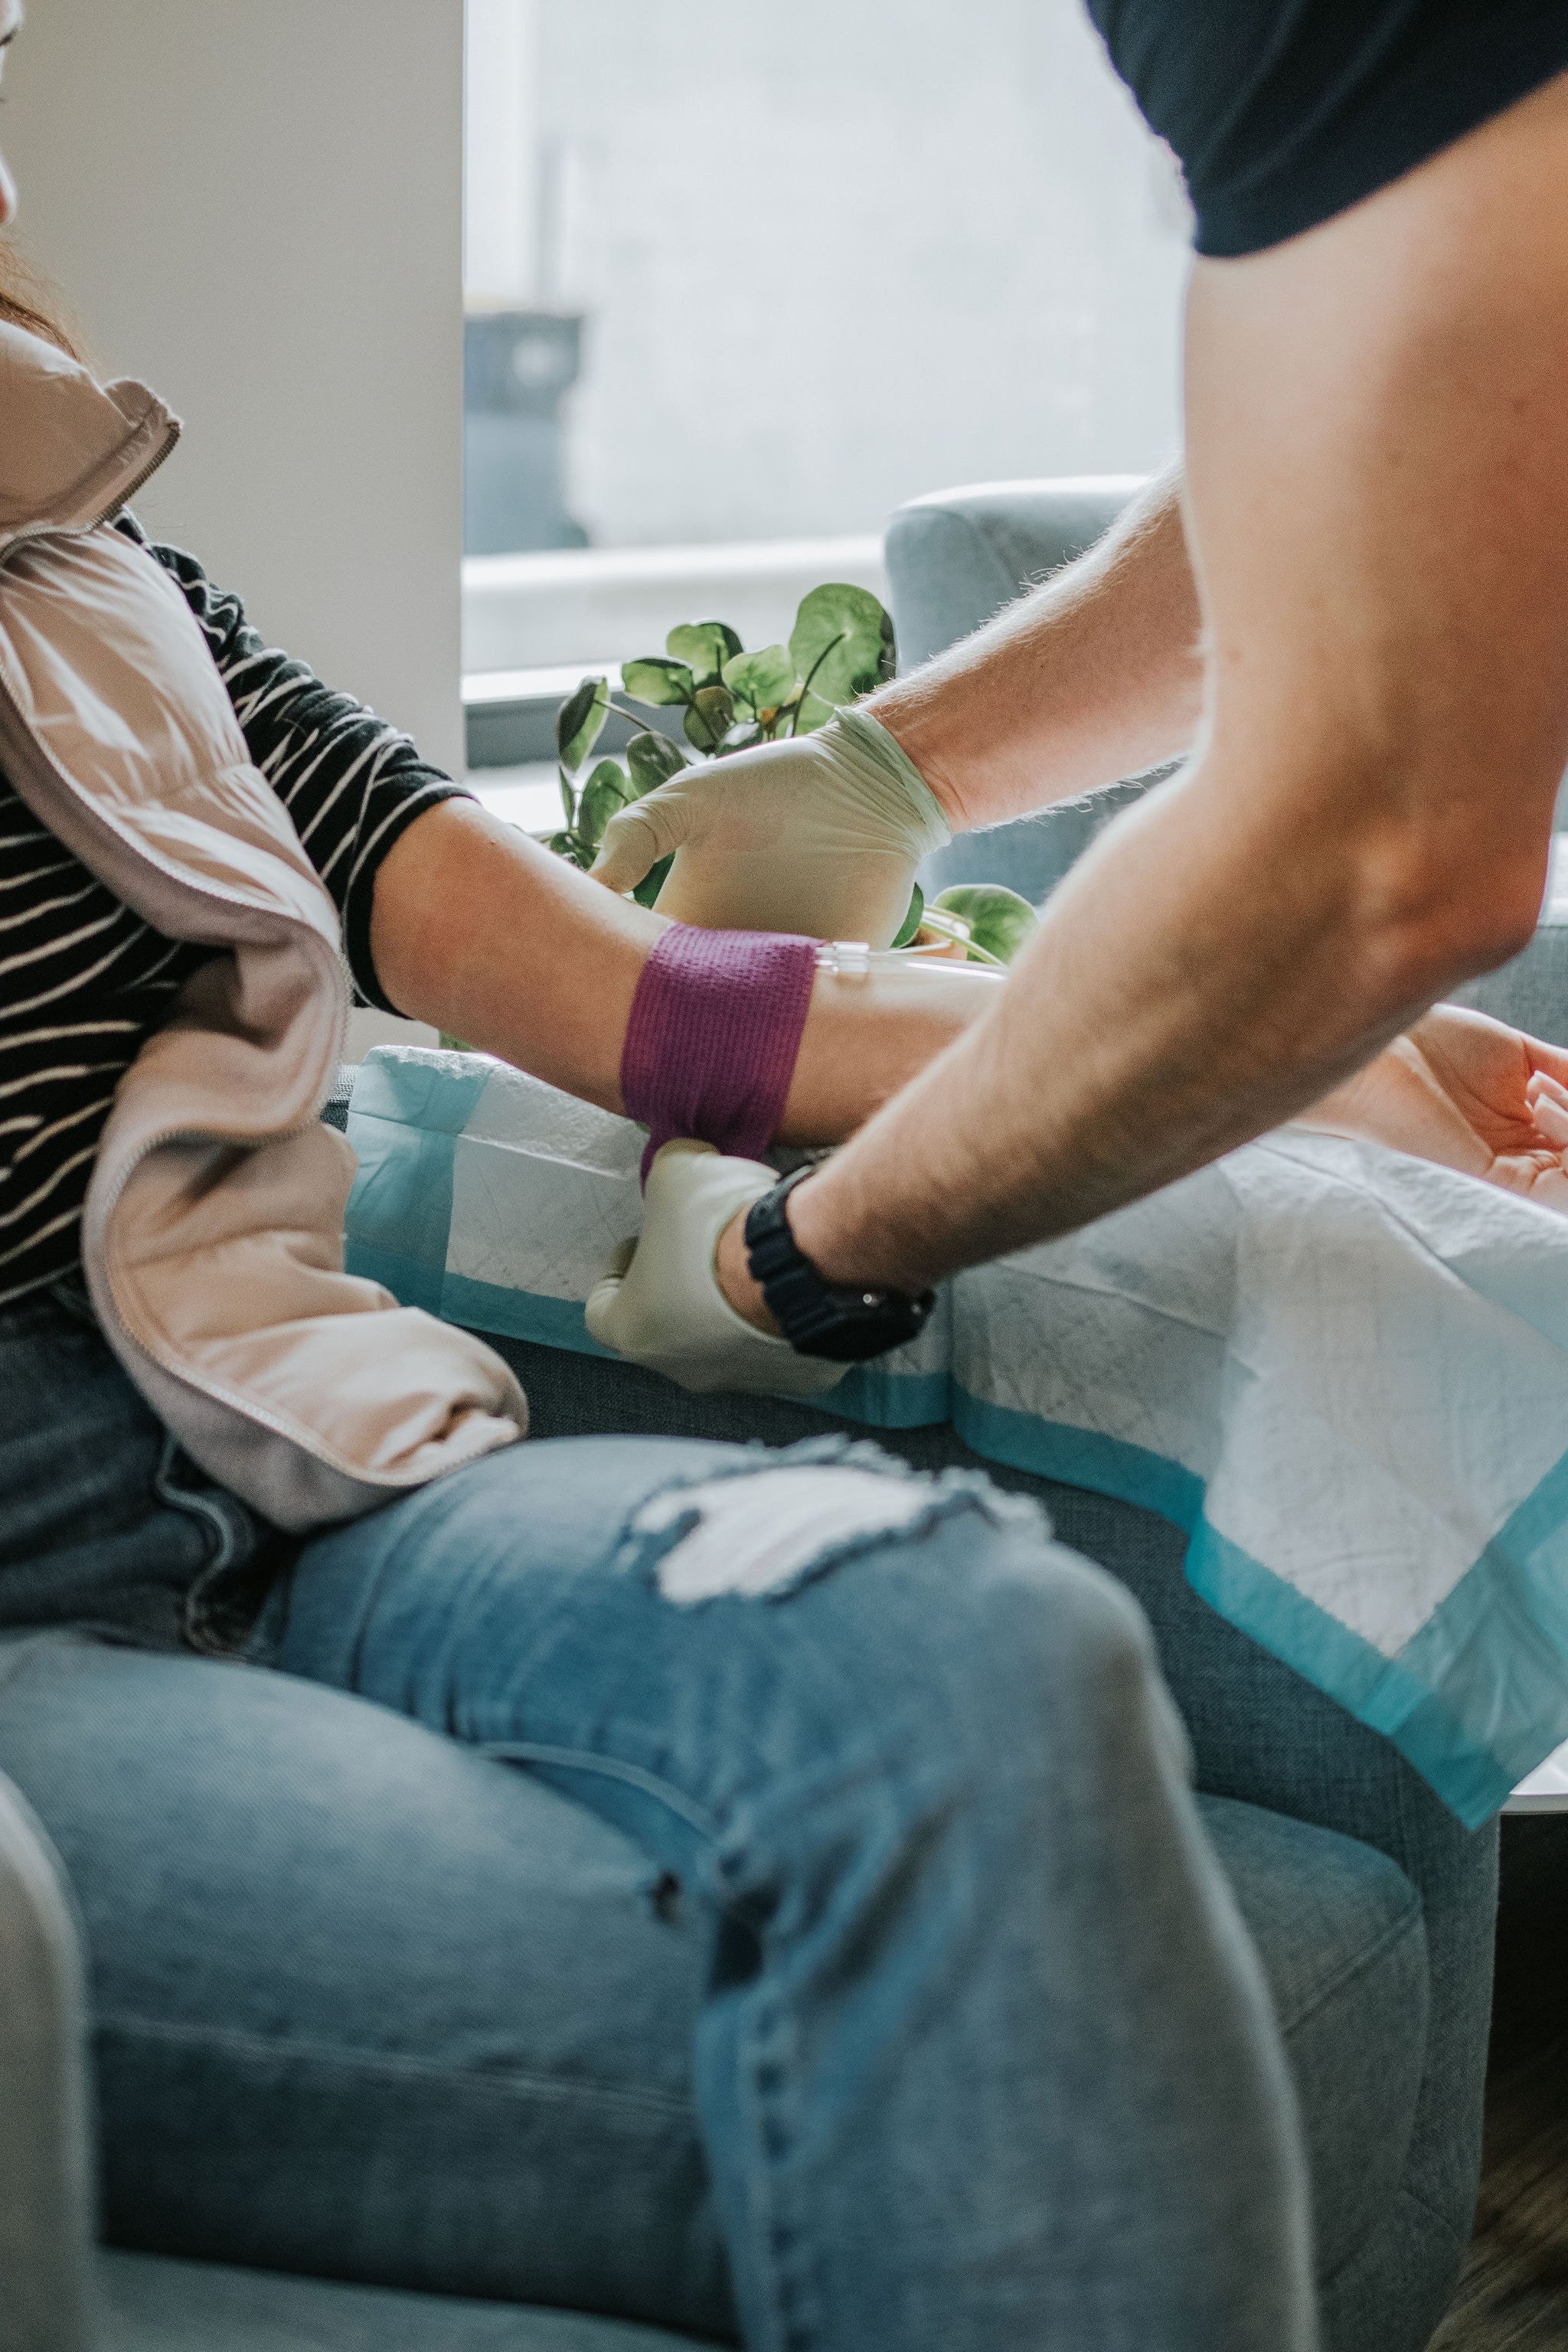 A person helping a patient with the IV. | Source: Unsplash